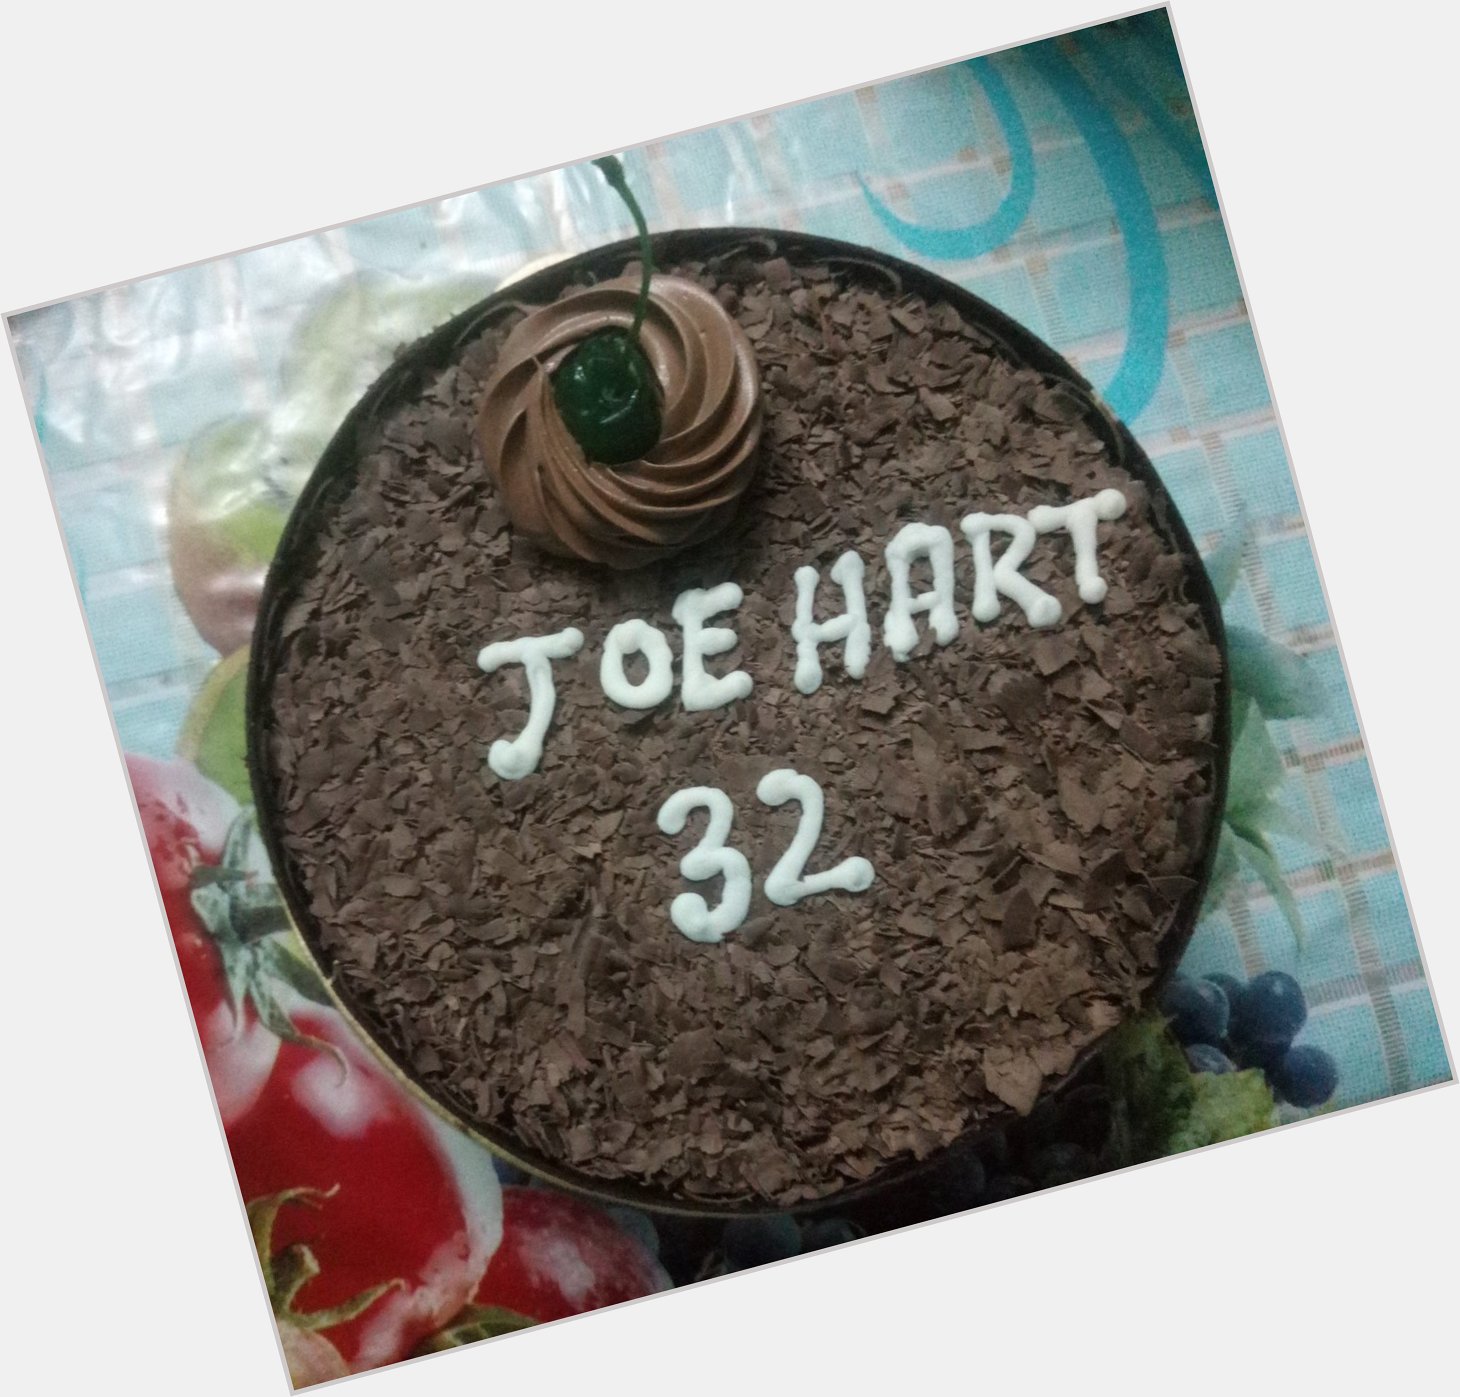  Happy birthday to your goalkeeper \"Joe Hart\"
This little gift is for Joe from me 